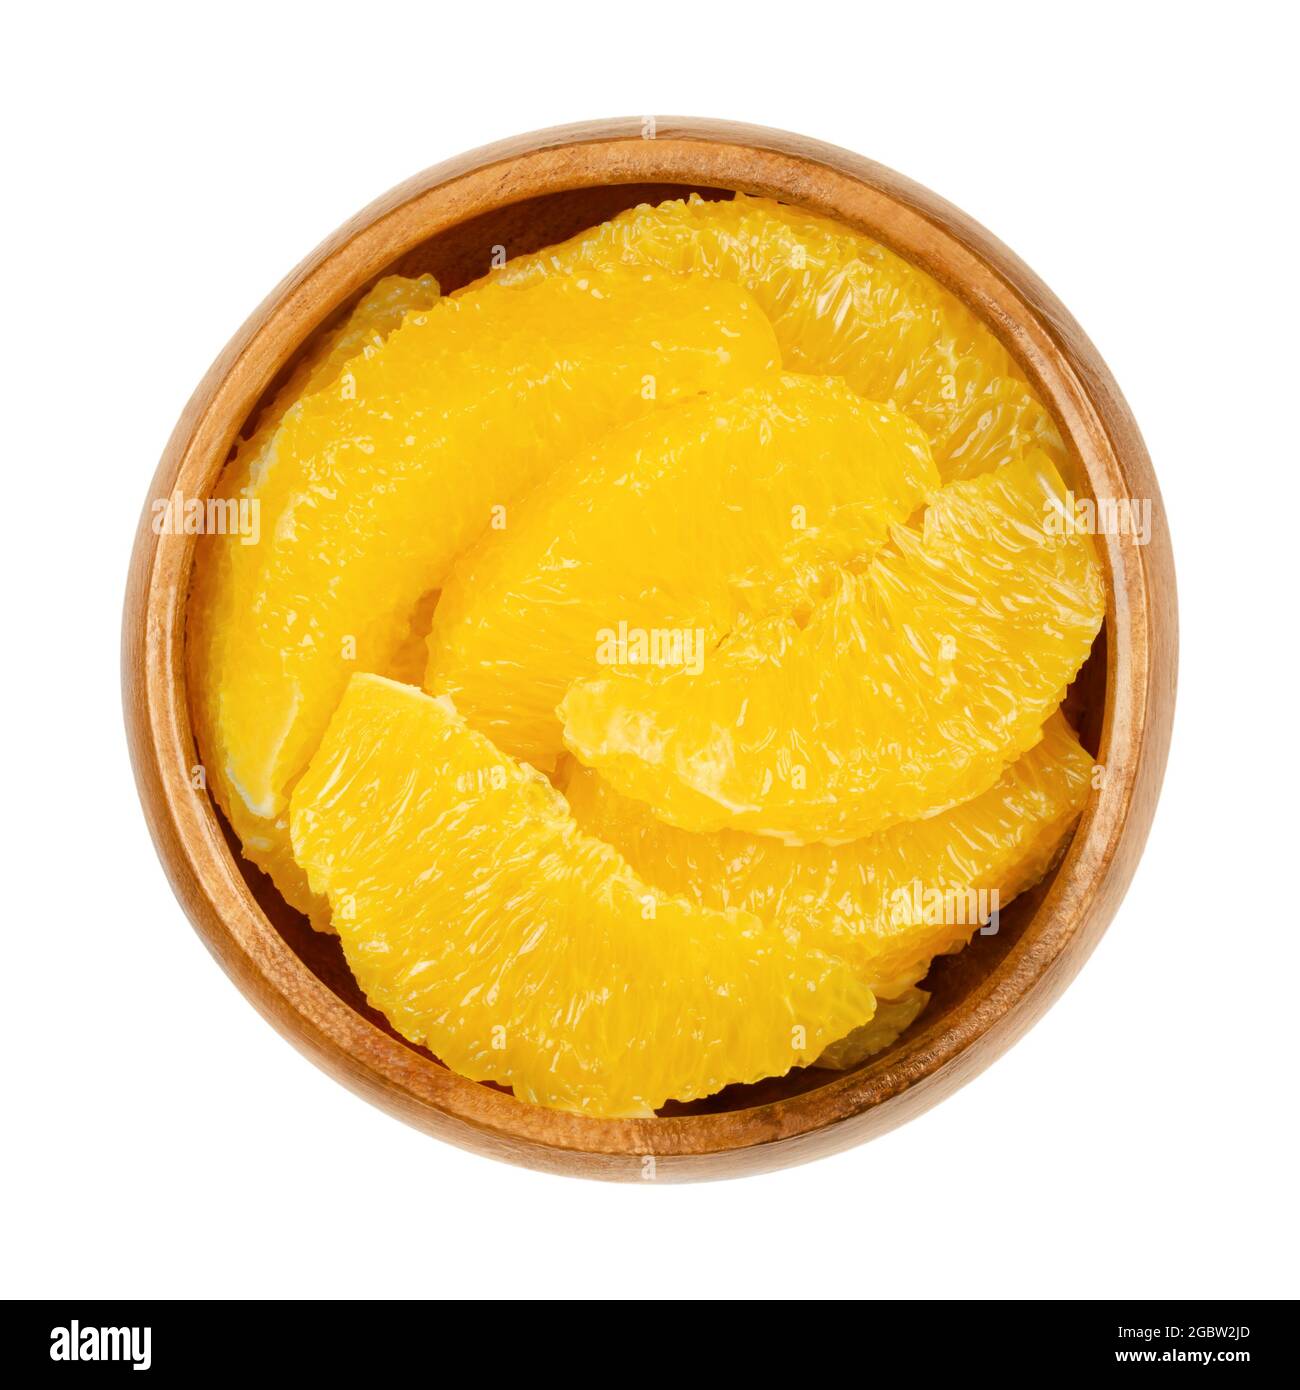 Orange slices supreme, in a wooden bowl. Fresh, ripe orange segments, cut without membranes, sweet fruit with juicy, yellow fruit flesh. Stock Photo